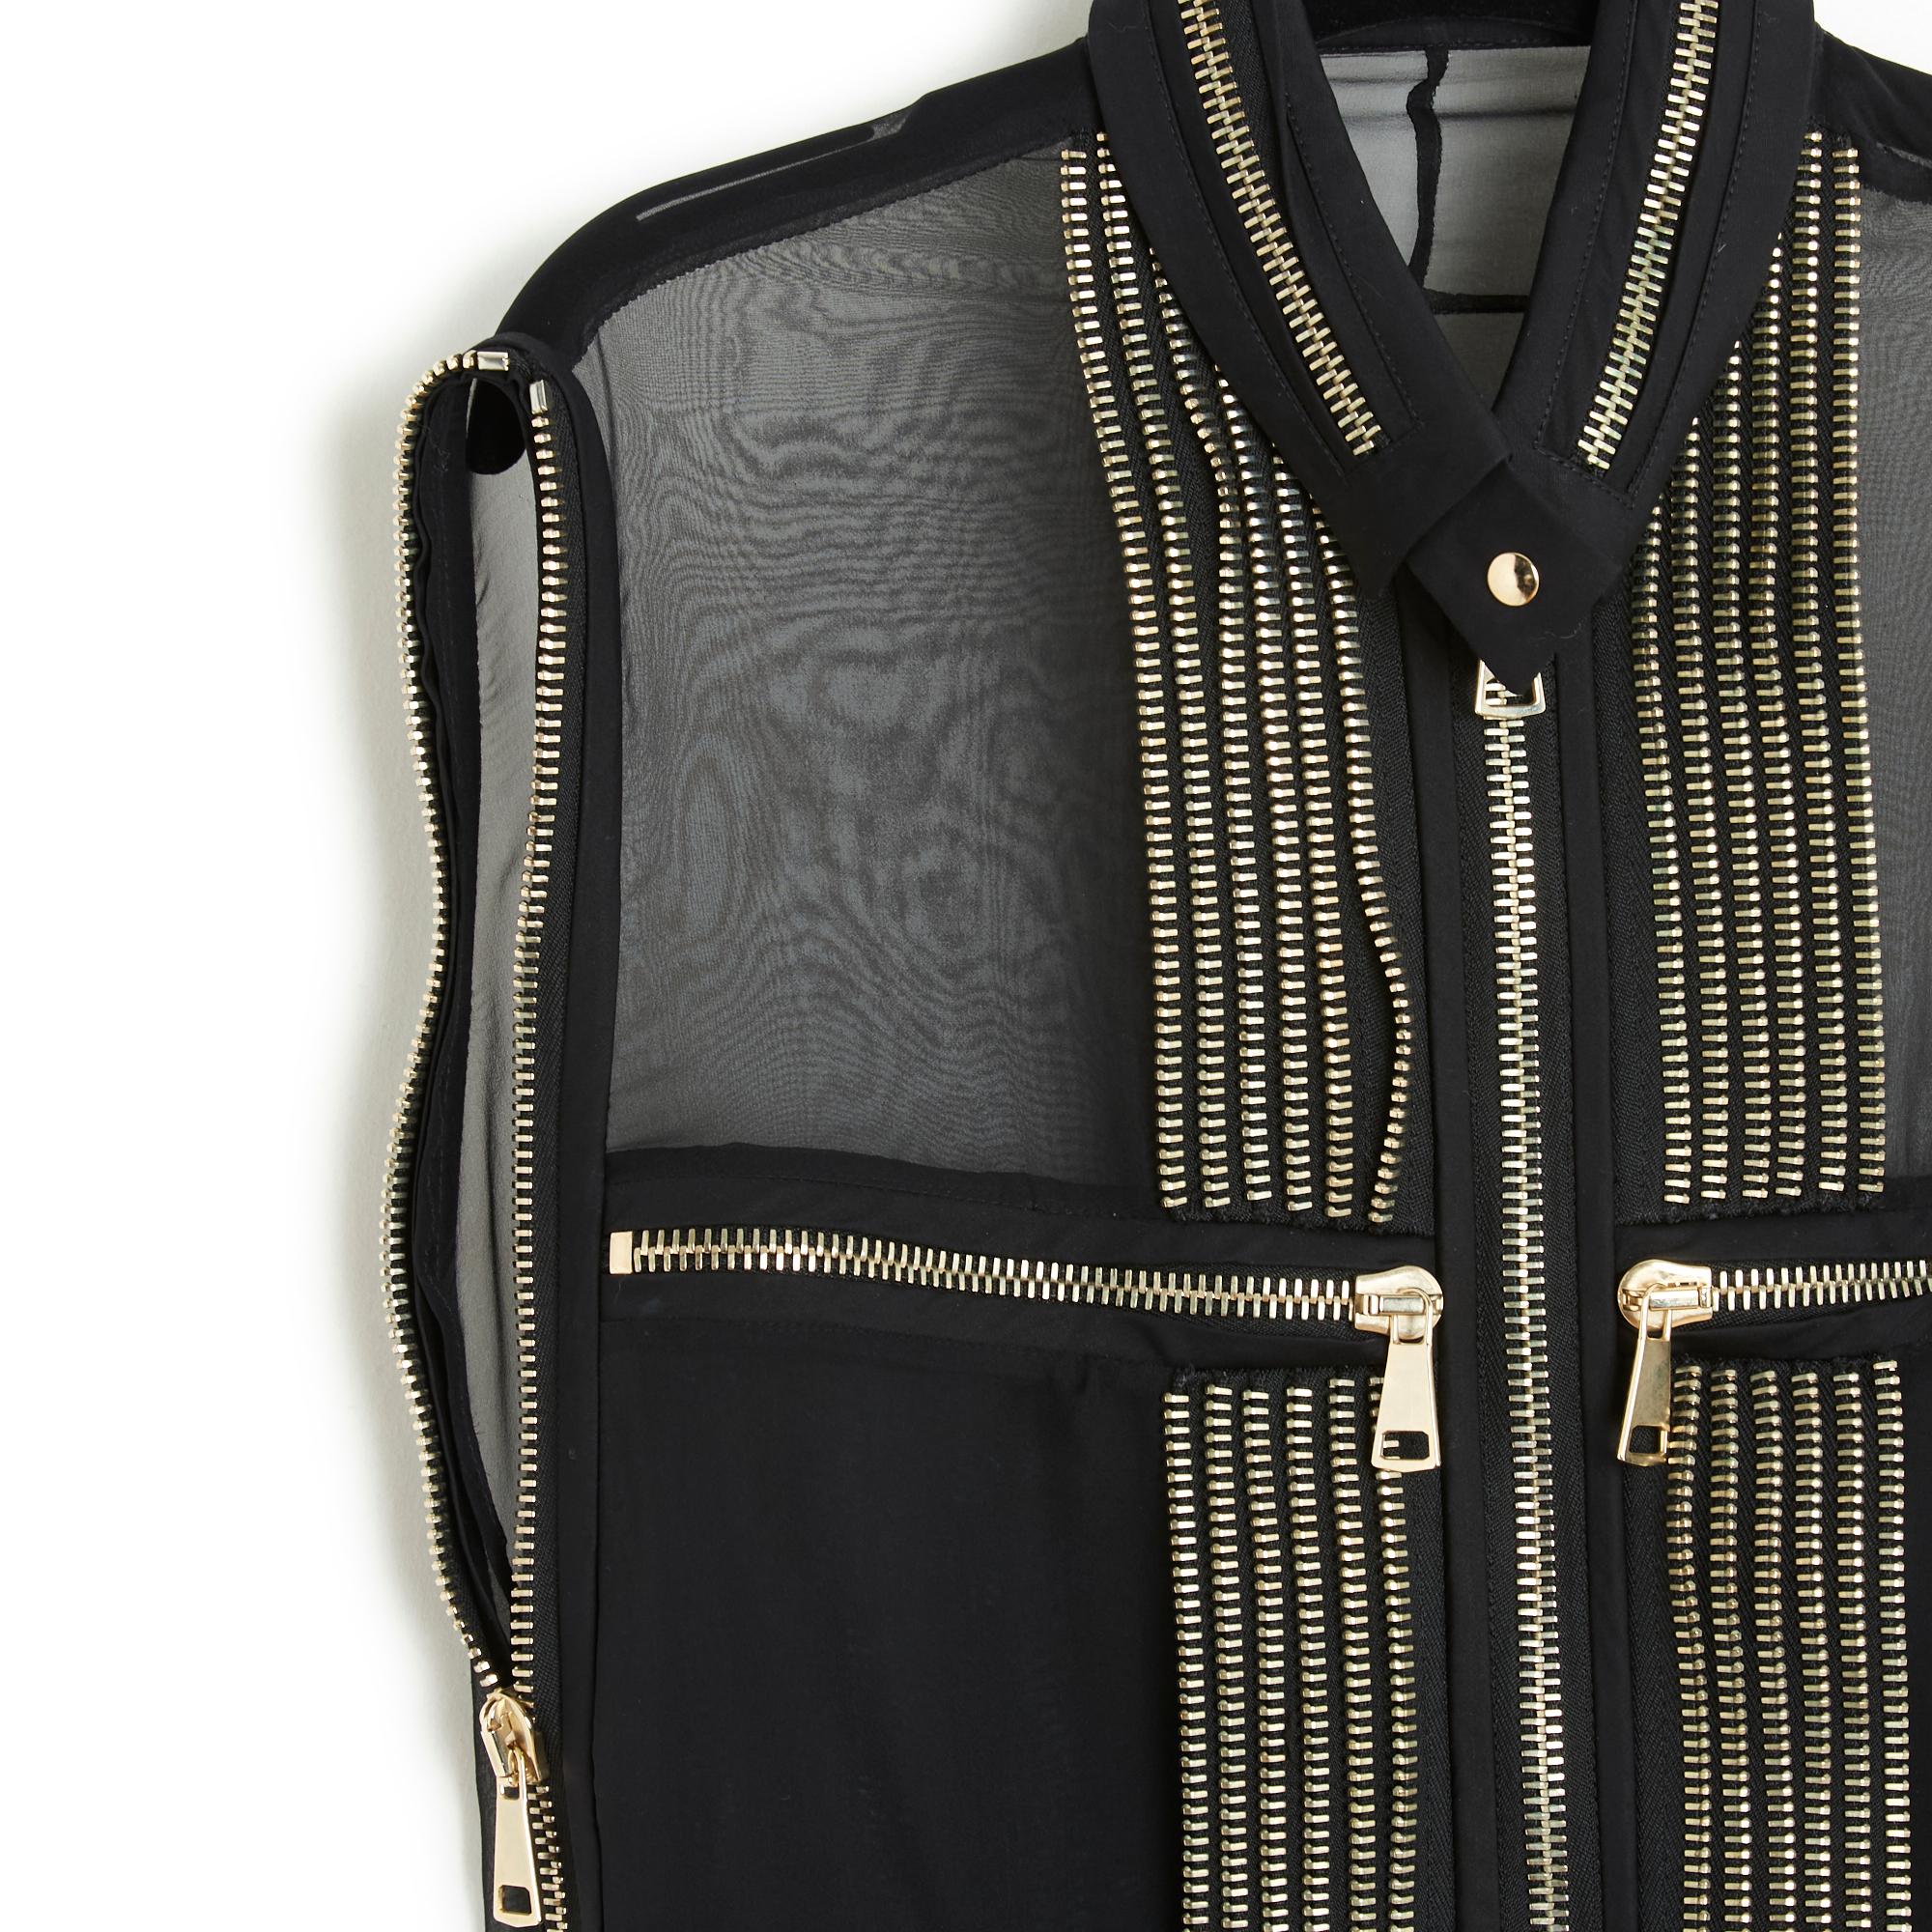 Givenchy top SS 2011 collection (by Riccardo Tisci) in black silk chiffon embroidered with silver metal zips, small high collar closed with a snap, long front zip, 2 zipped pockets on the chest and zips on each side to open or close. Size 42FR but